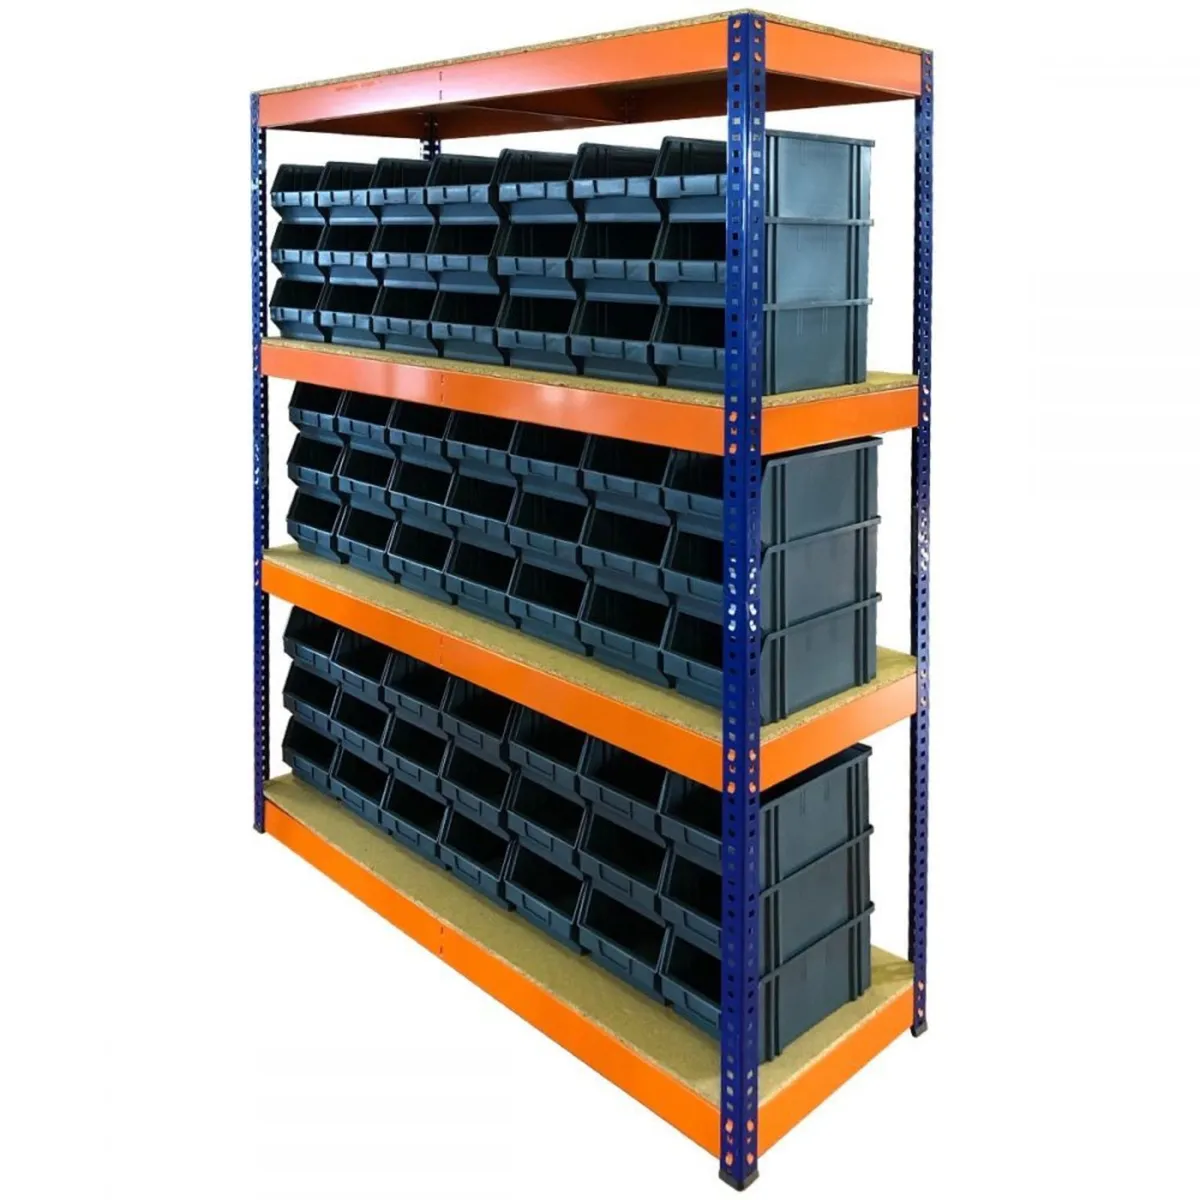 Value Shelving 1900h x 1500w with 57 containers